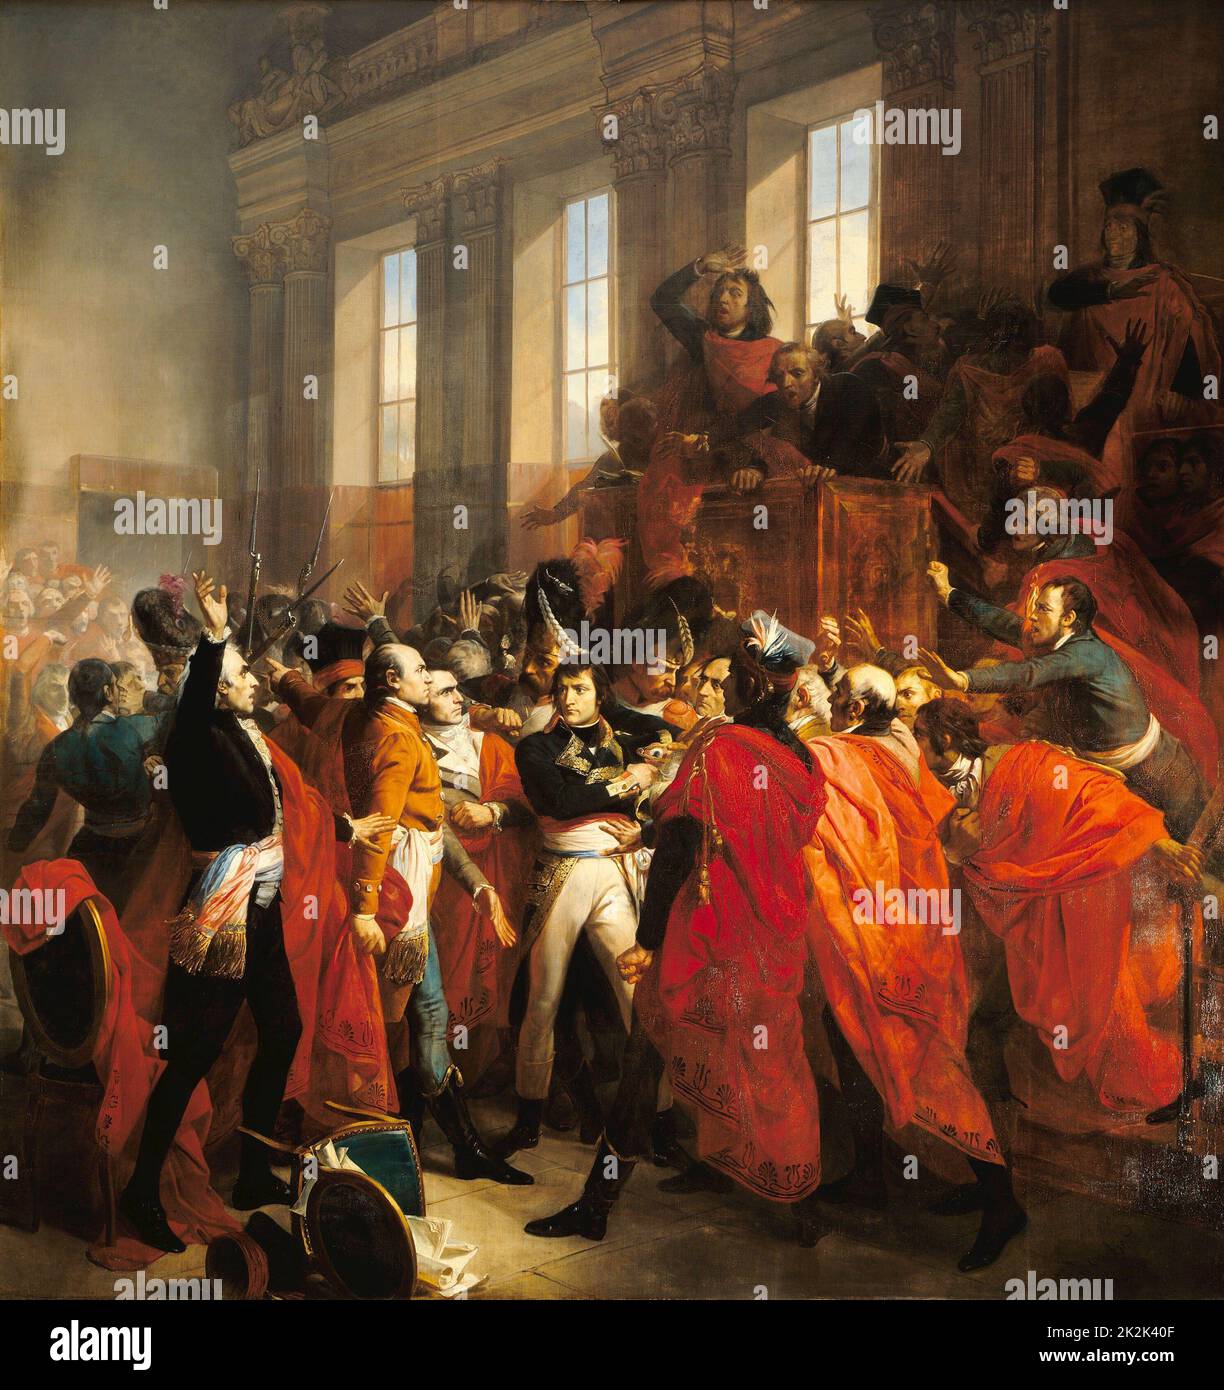 François Bouchot (1800-1842)  French School Bonaparte at the Council of Five Hundred in Saint-Cloud (18 Brumaire, Year VIII - November 9, 1799) 1840 Oil on canvas (4.21 x 4.01) Versailles, musée national du Château Stock Photo